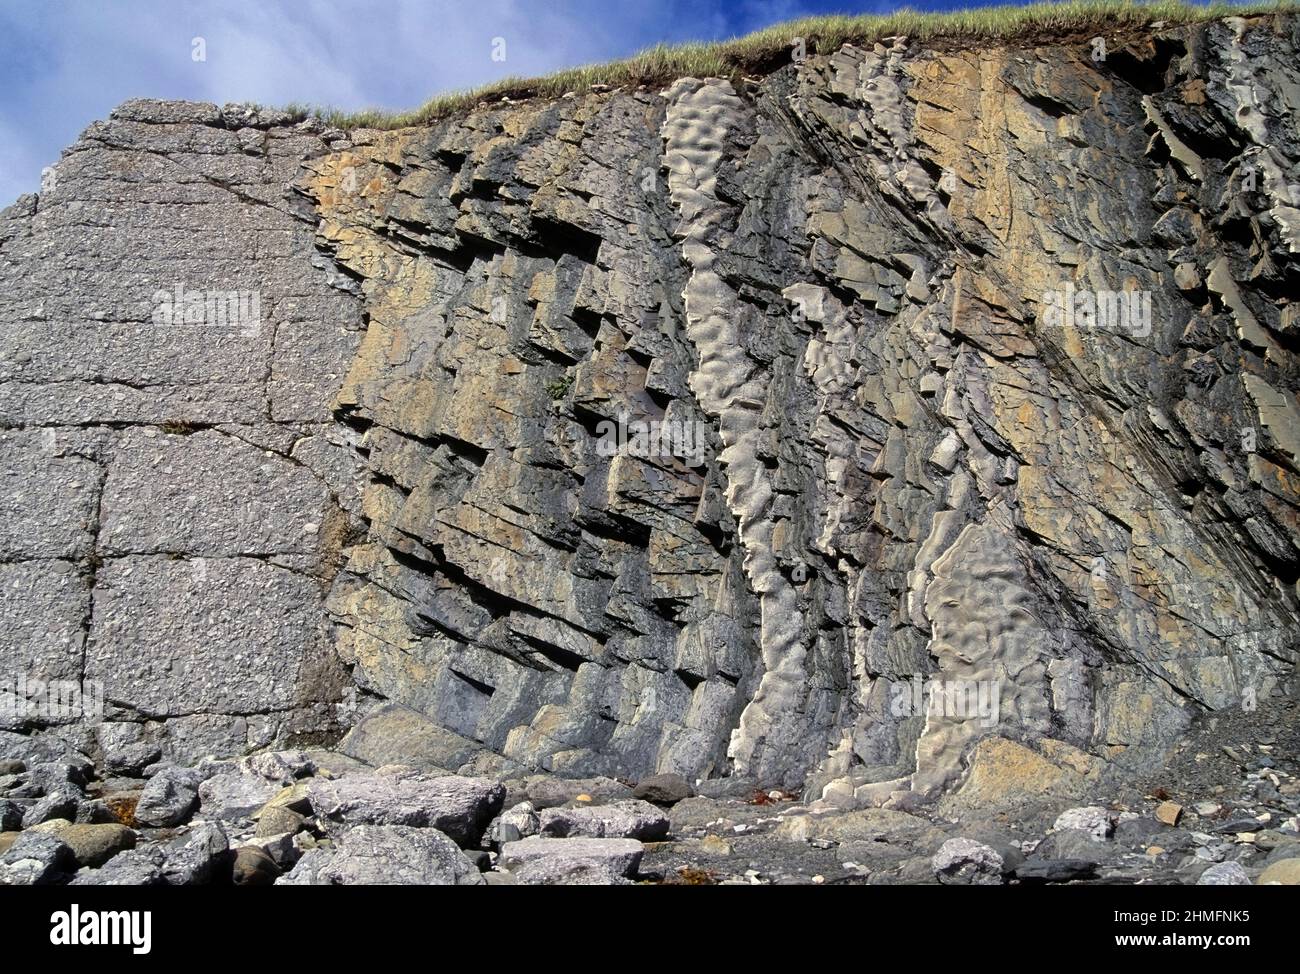 Layered limestones and shales tipped at 115 degrees, 500 million years old, Green Point, Gros Morne National Park, Newfoundland, Canada. Stock Photo